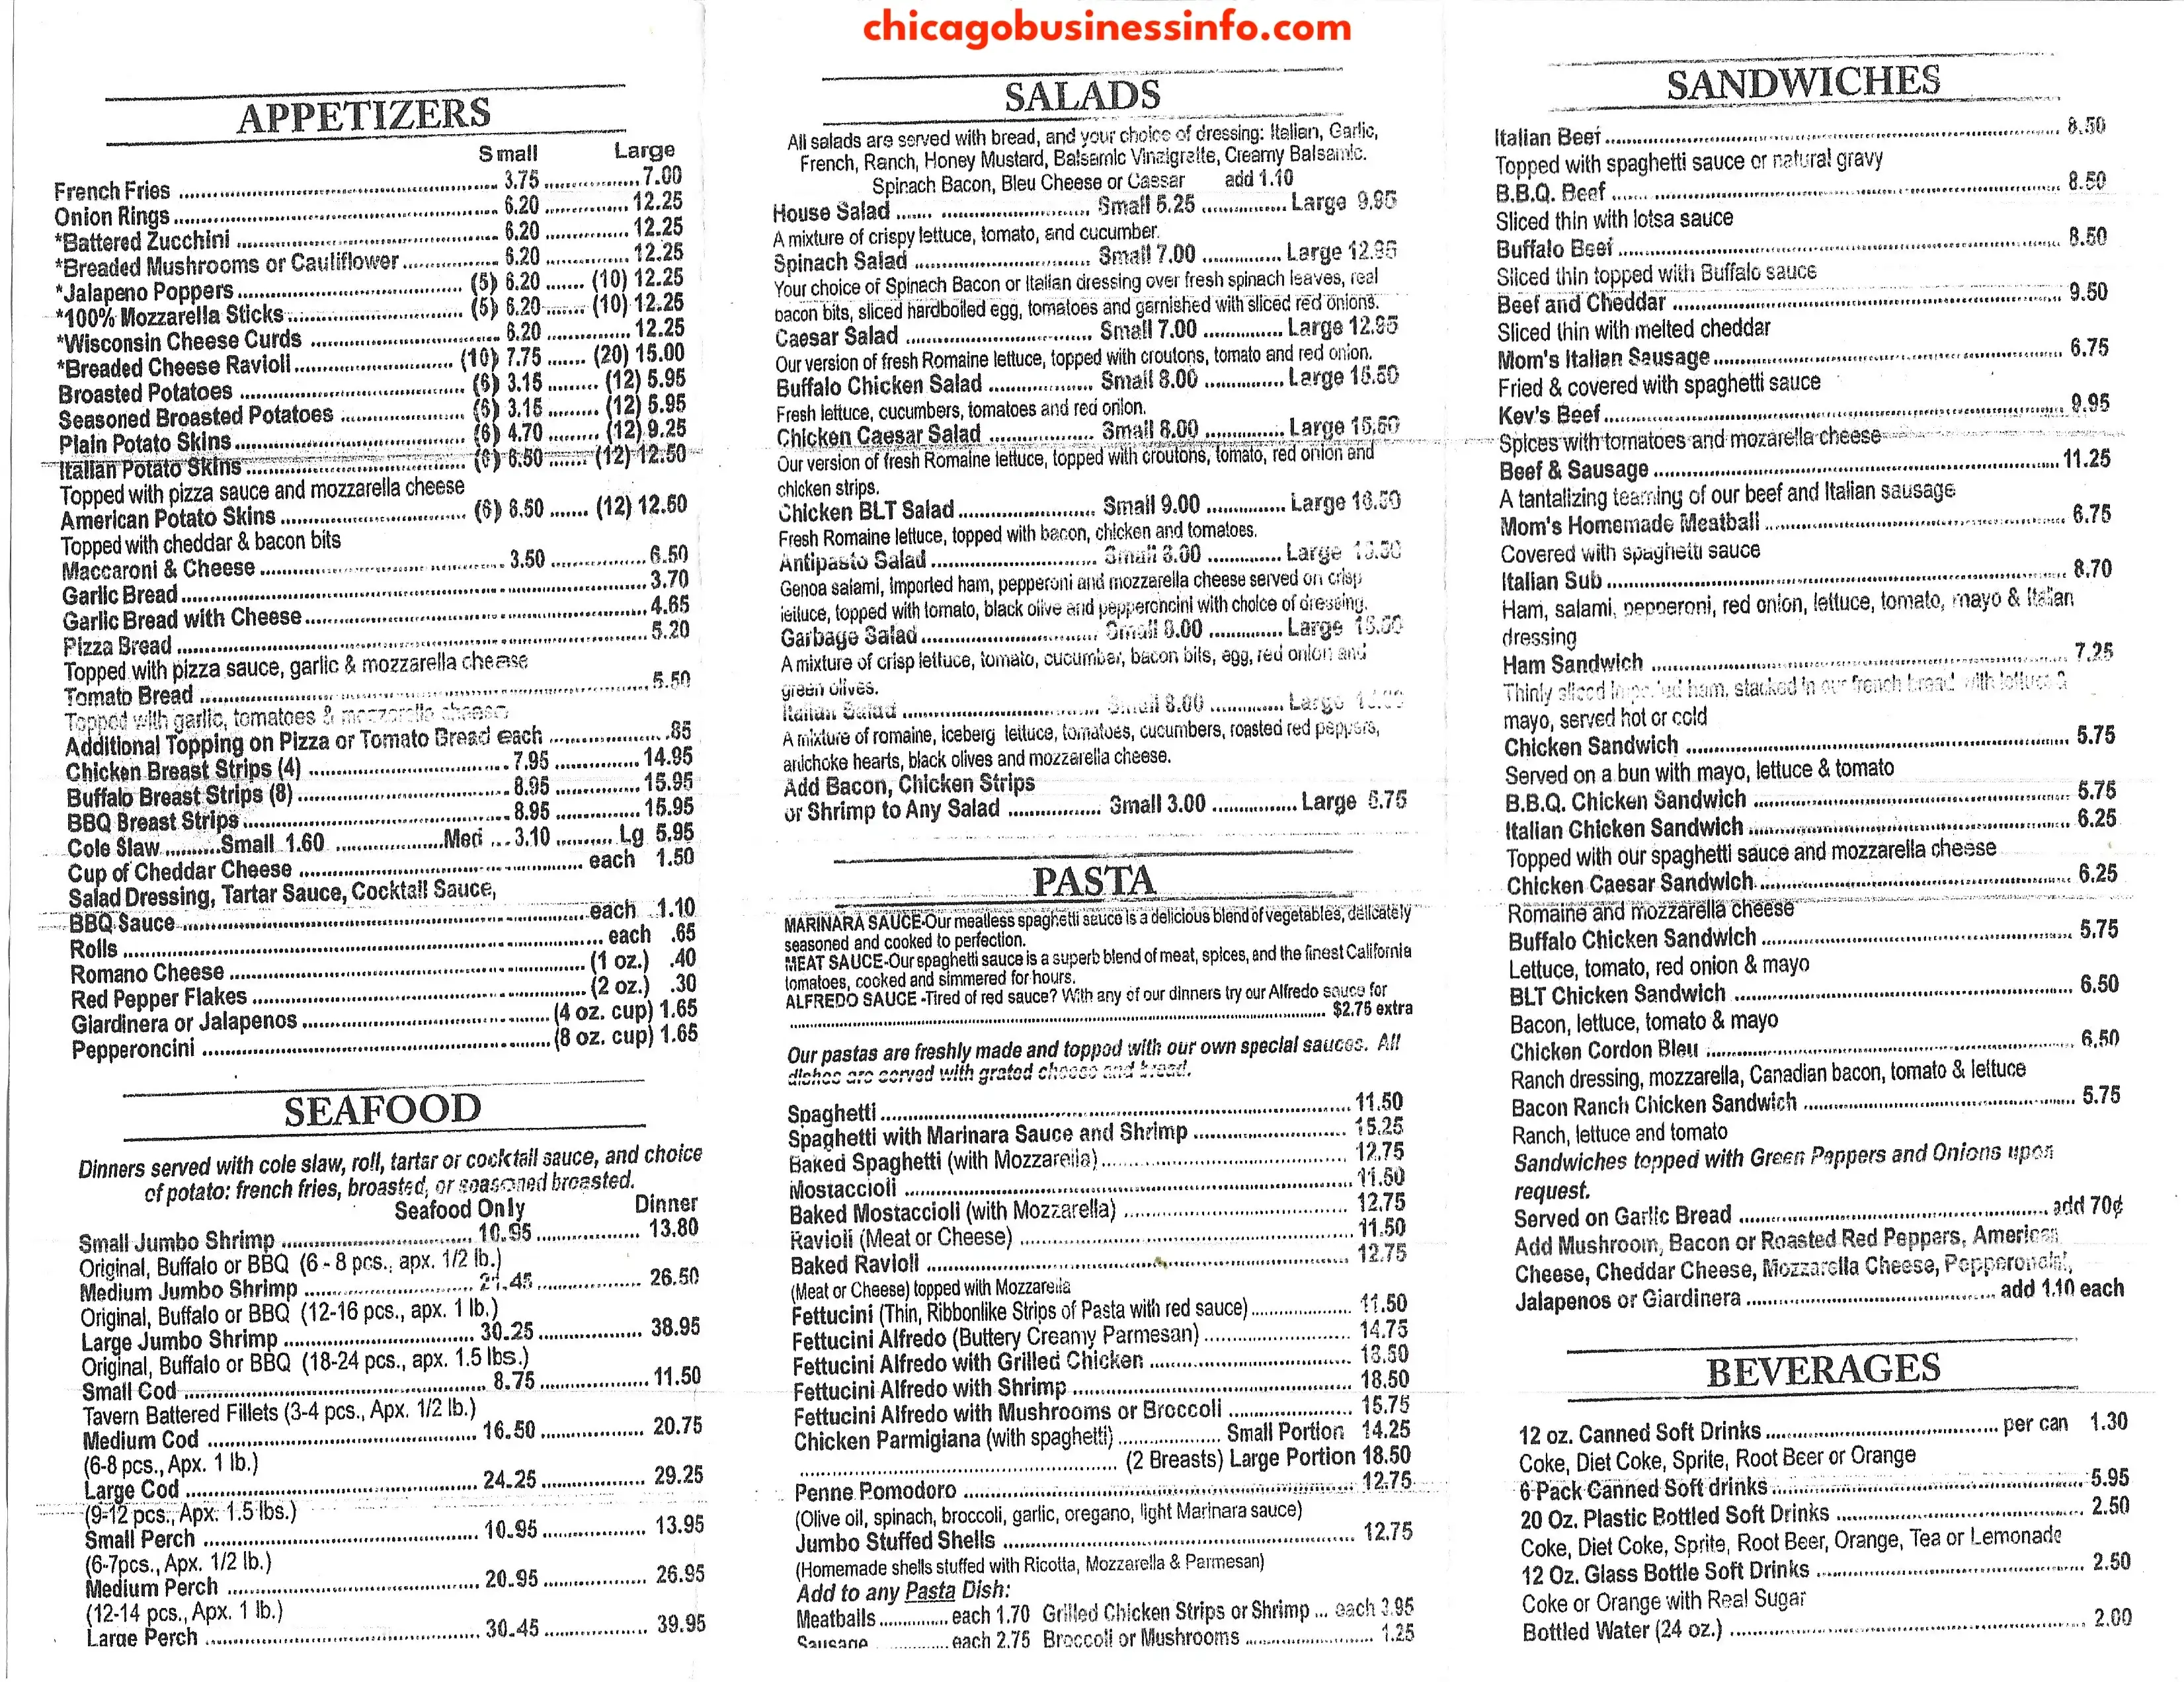 Arrenello's Pizza Carry Out Menu With Prices 1